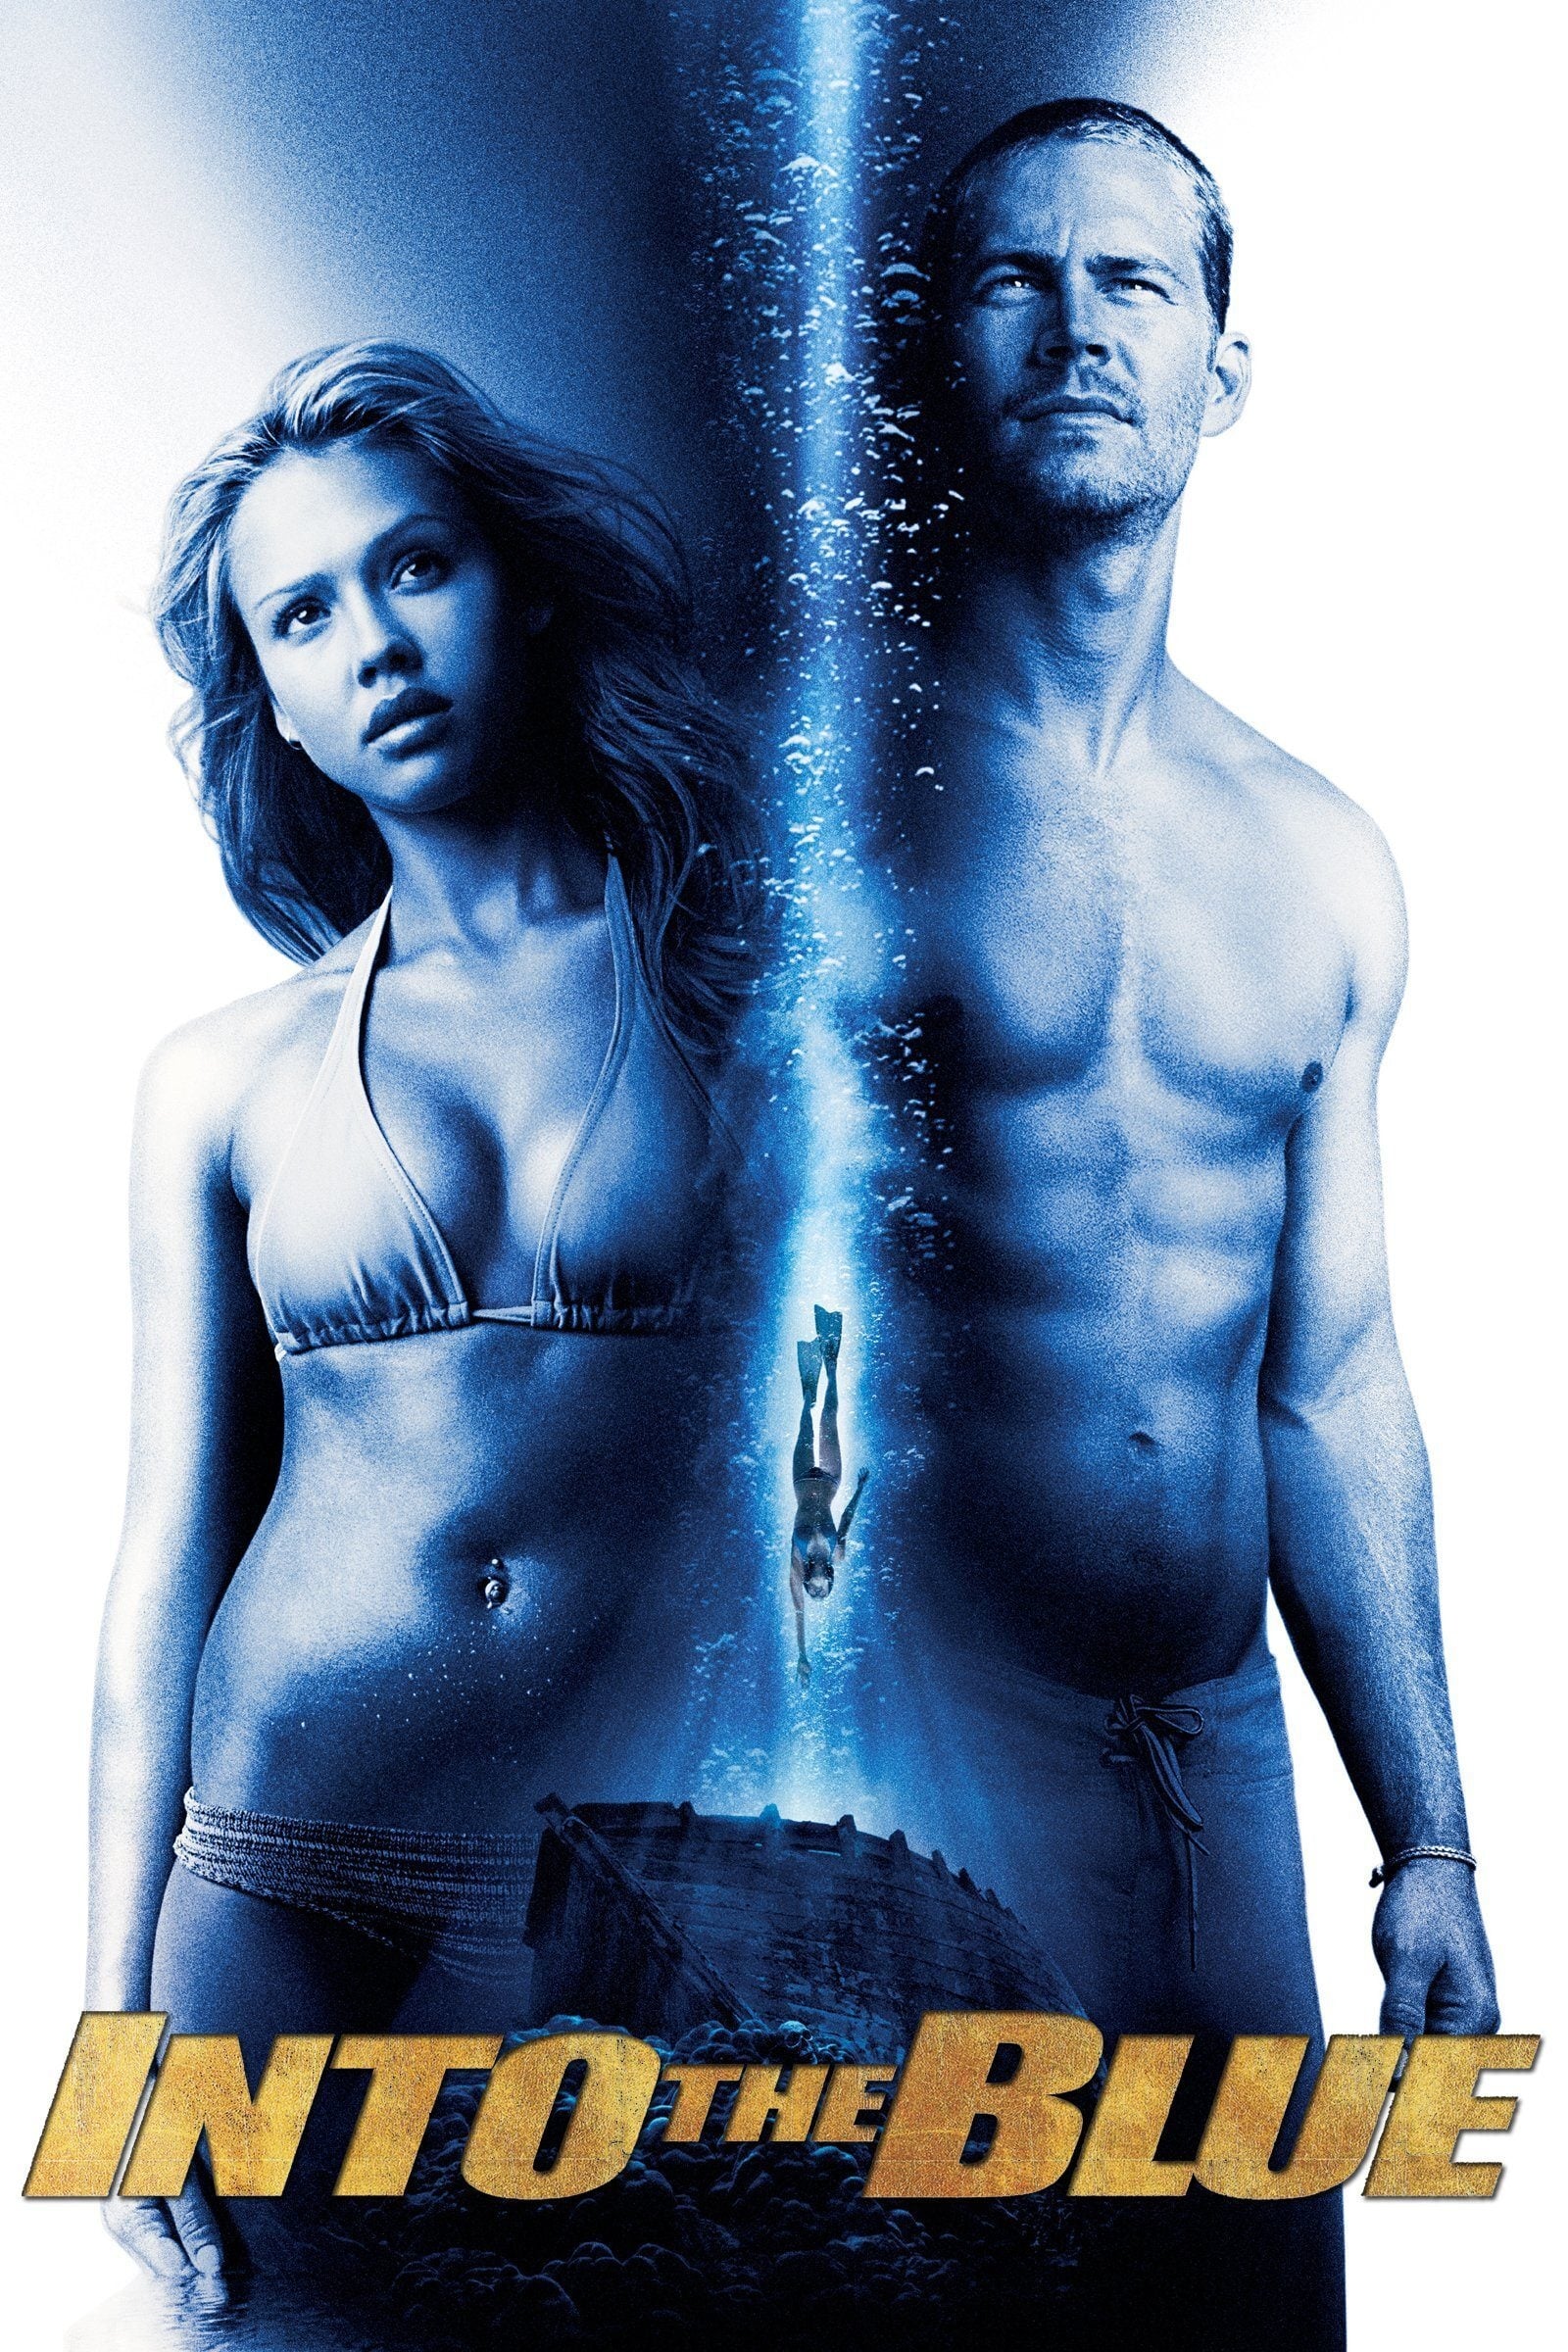 Poster for the movie "Into the Blue"